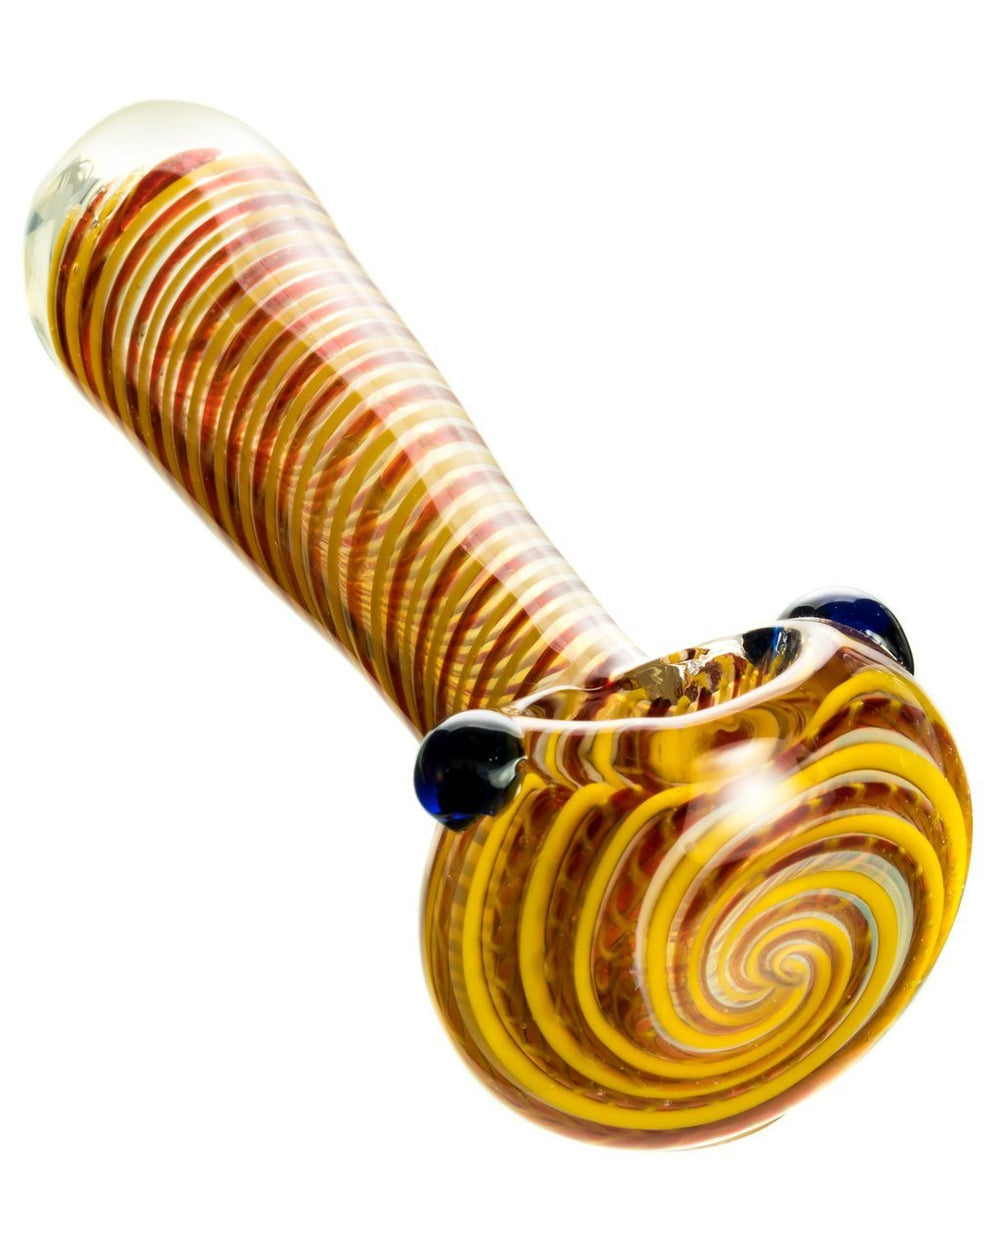 Spoon Pipes BoroDirect - Tight Spiral Spoon Pipe w/ Fumed Glass